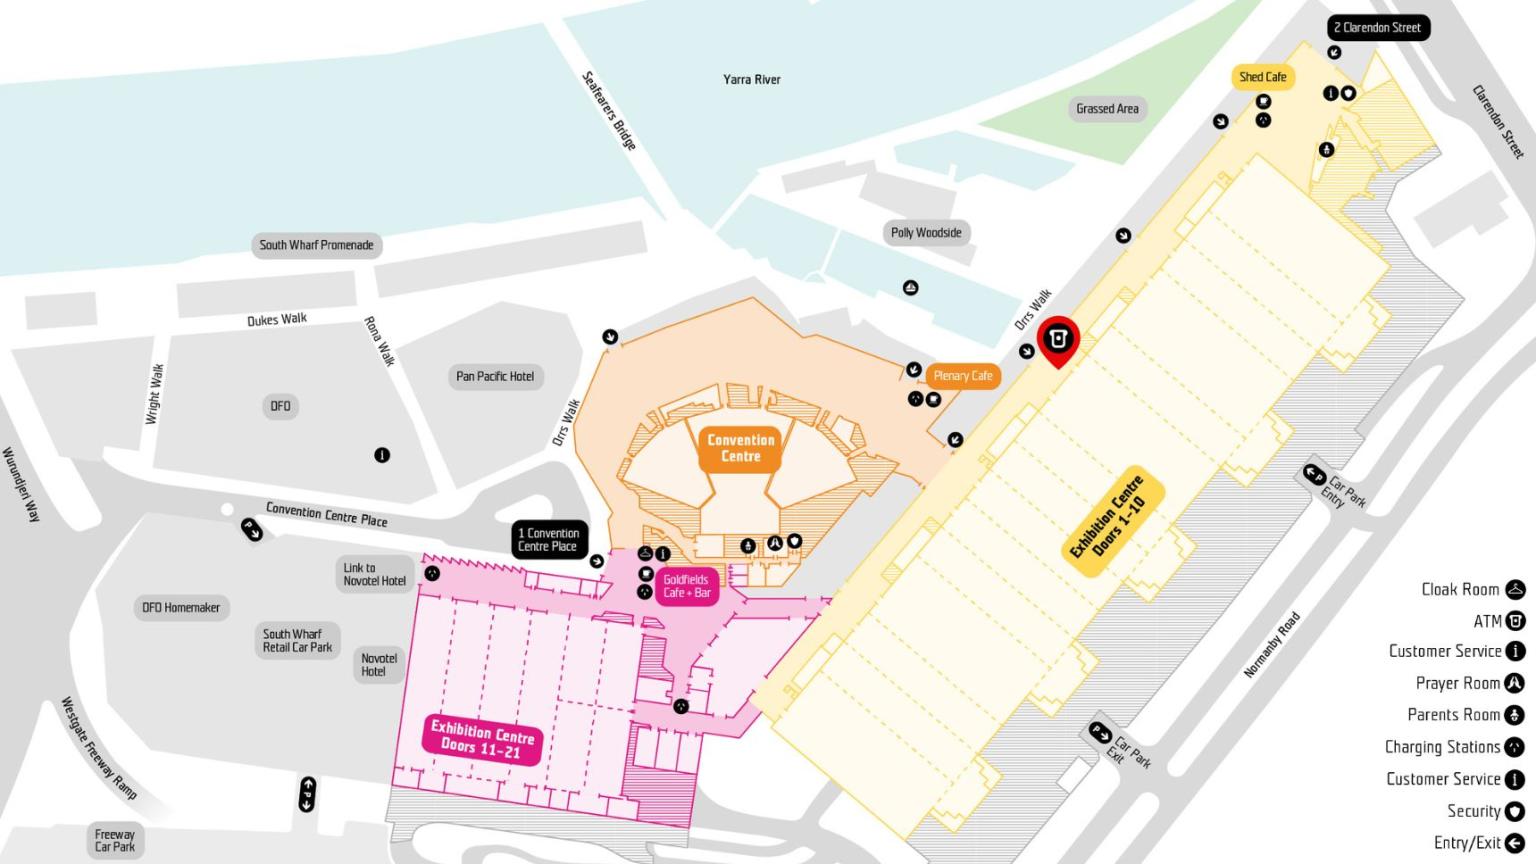 Floor plan of MCEC with a pin point highlighting the location of an ATM. 